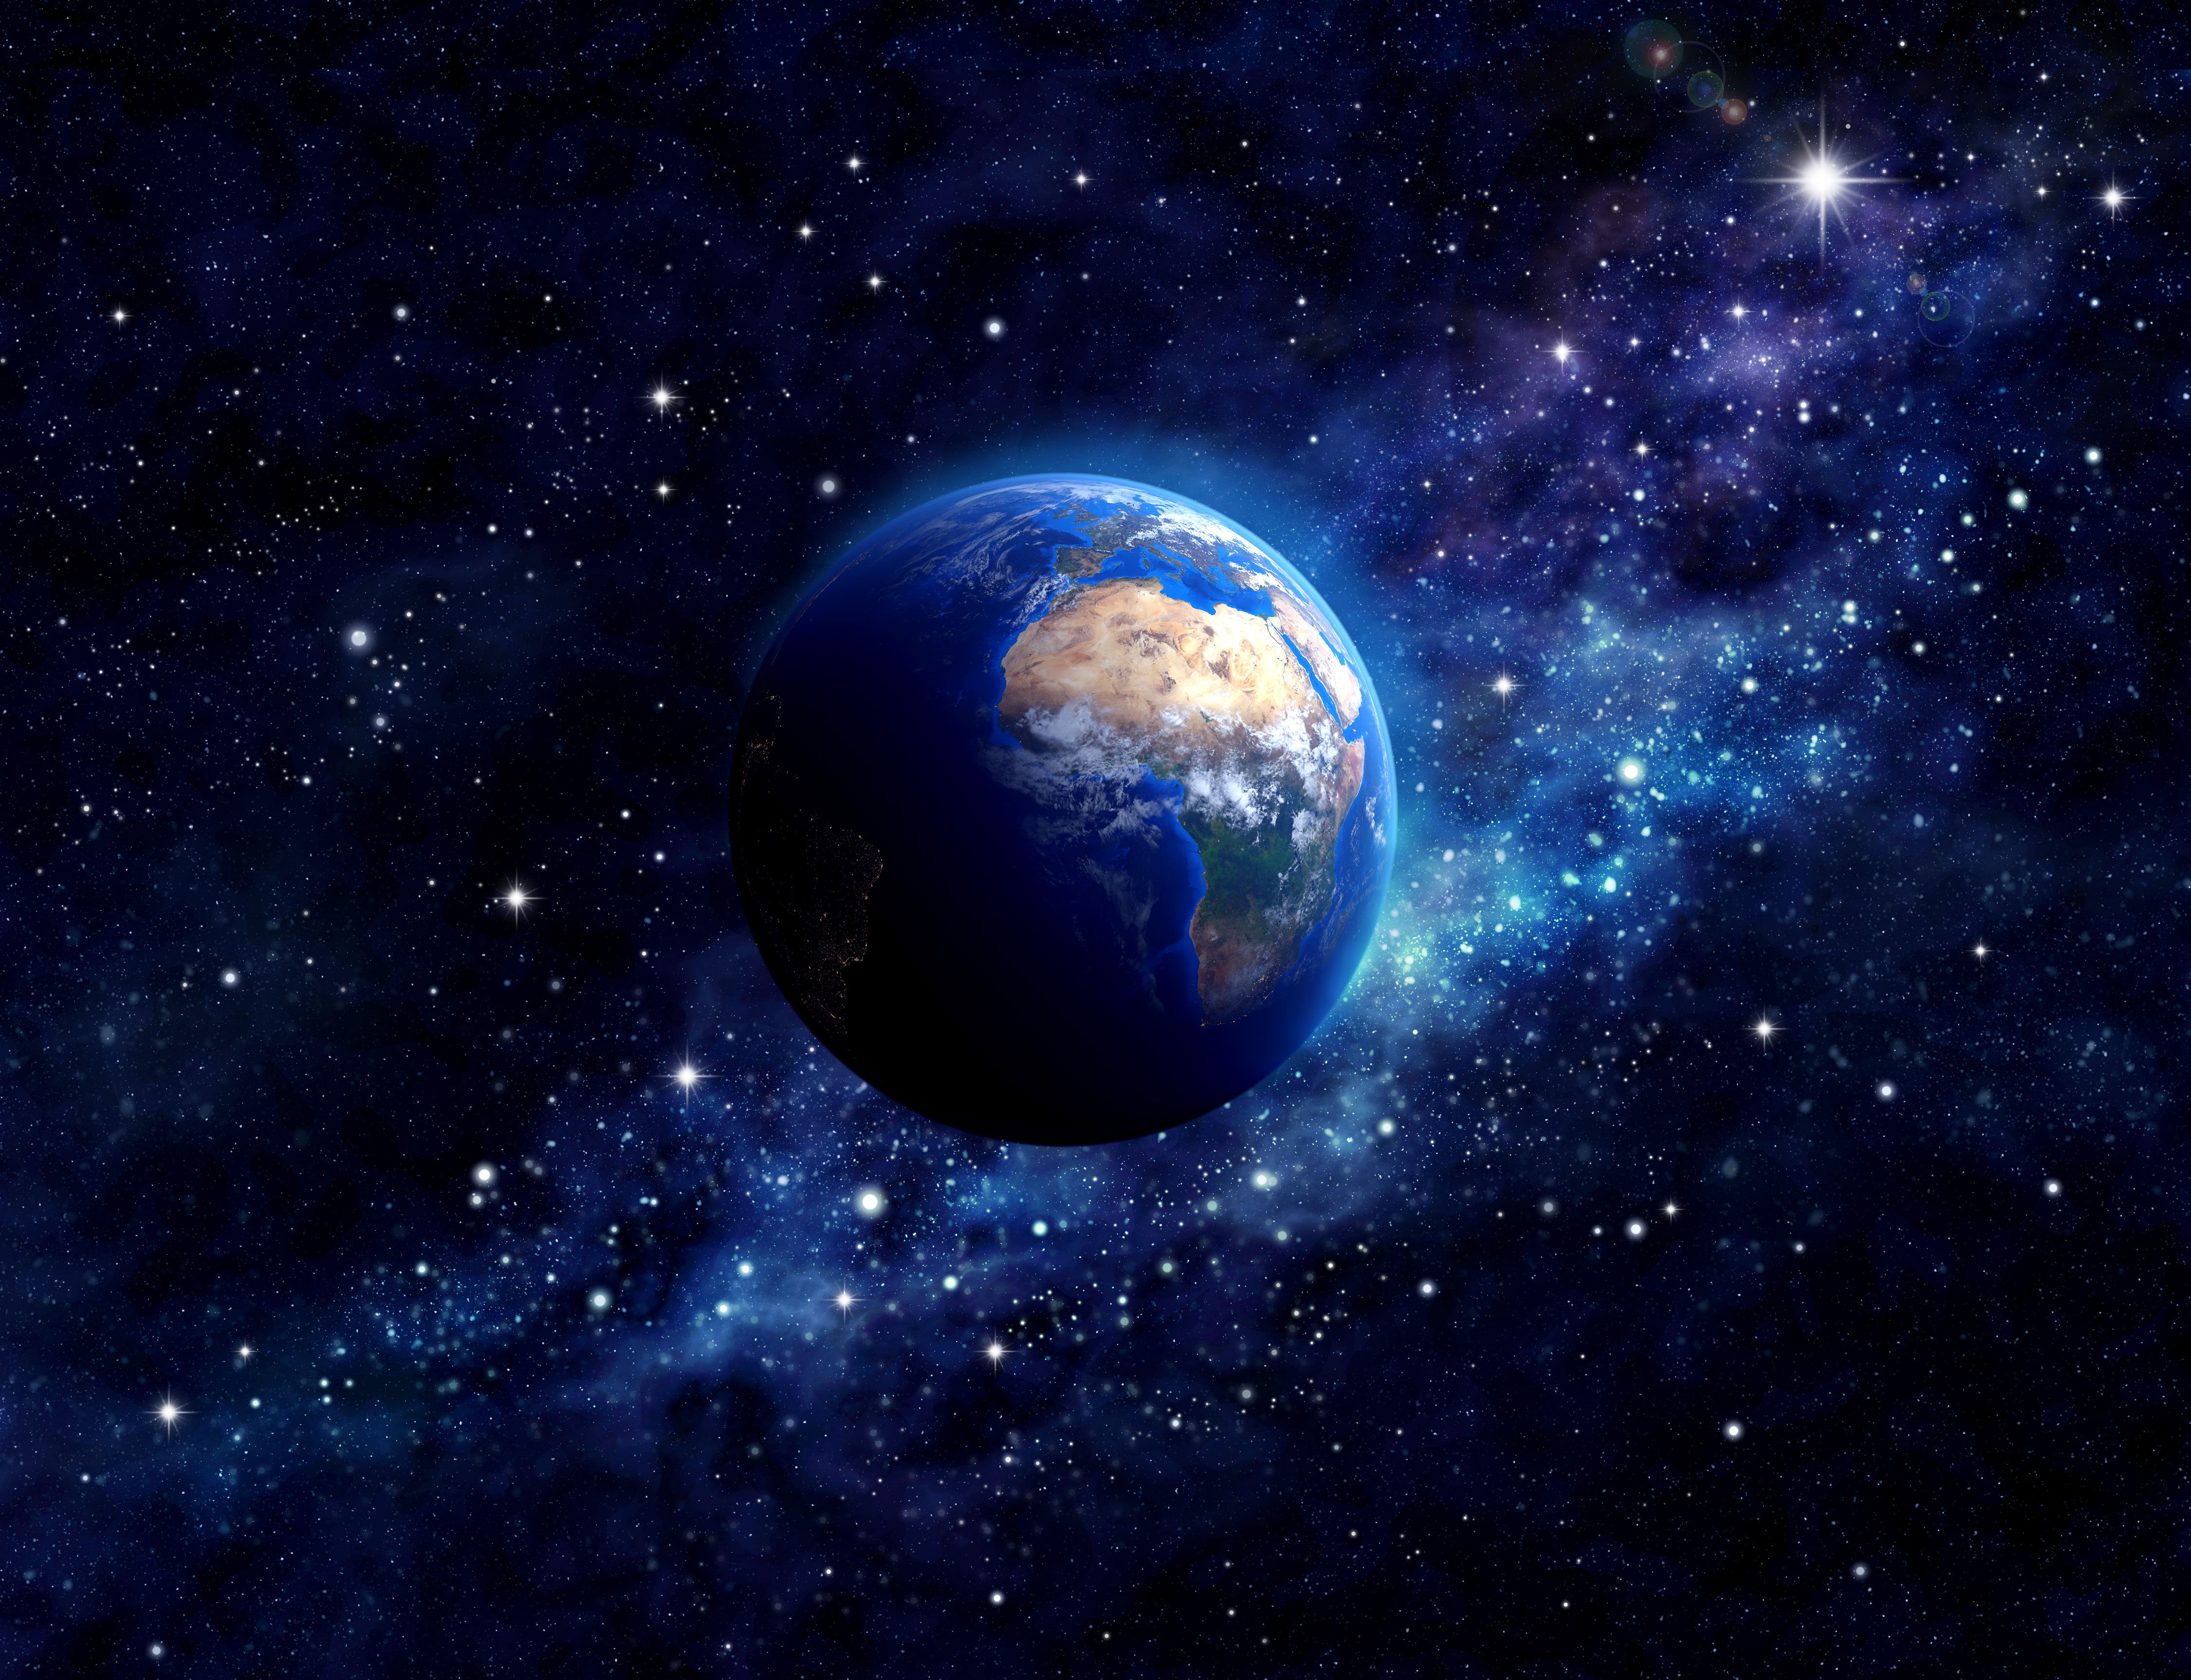 A planet is surrounded by stars and space - Earth